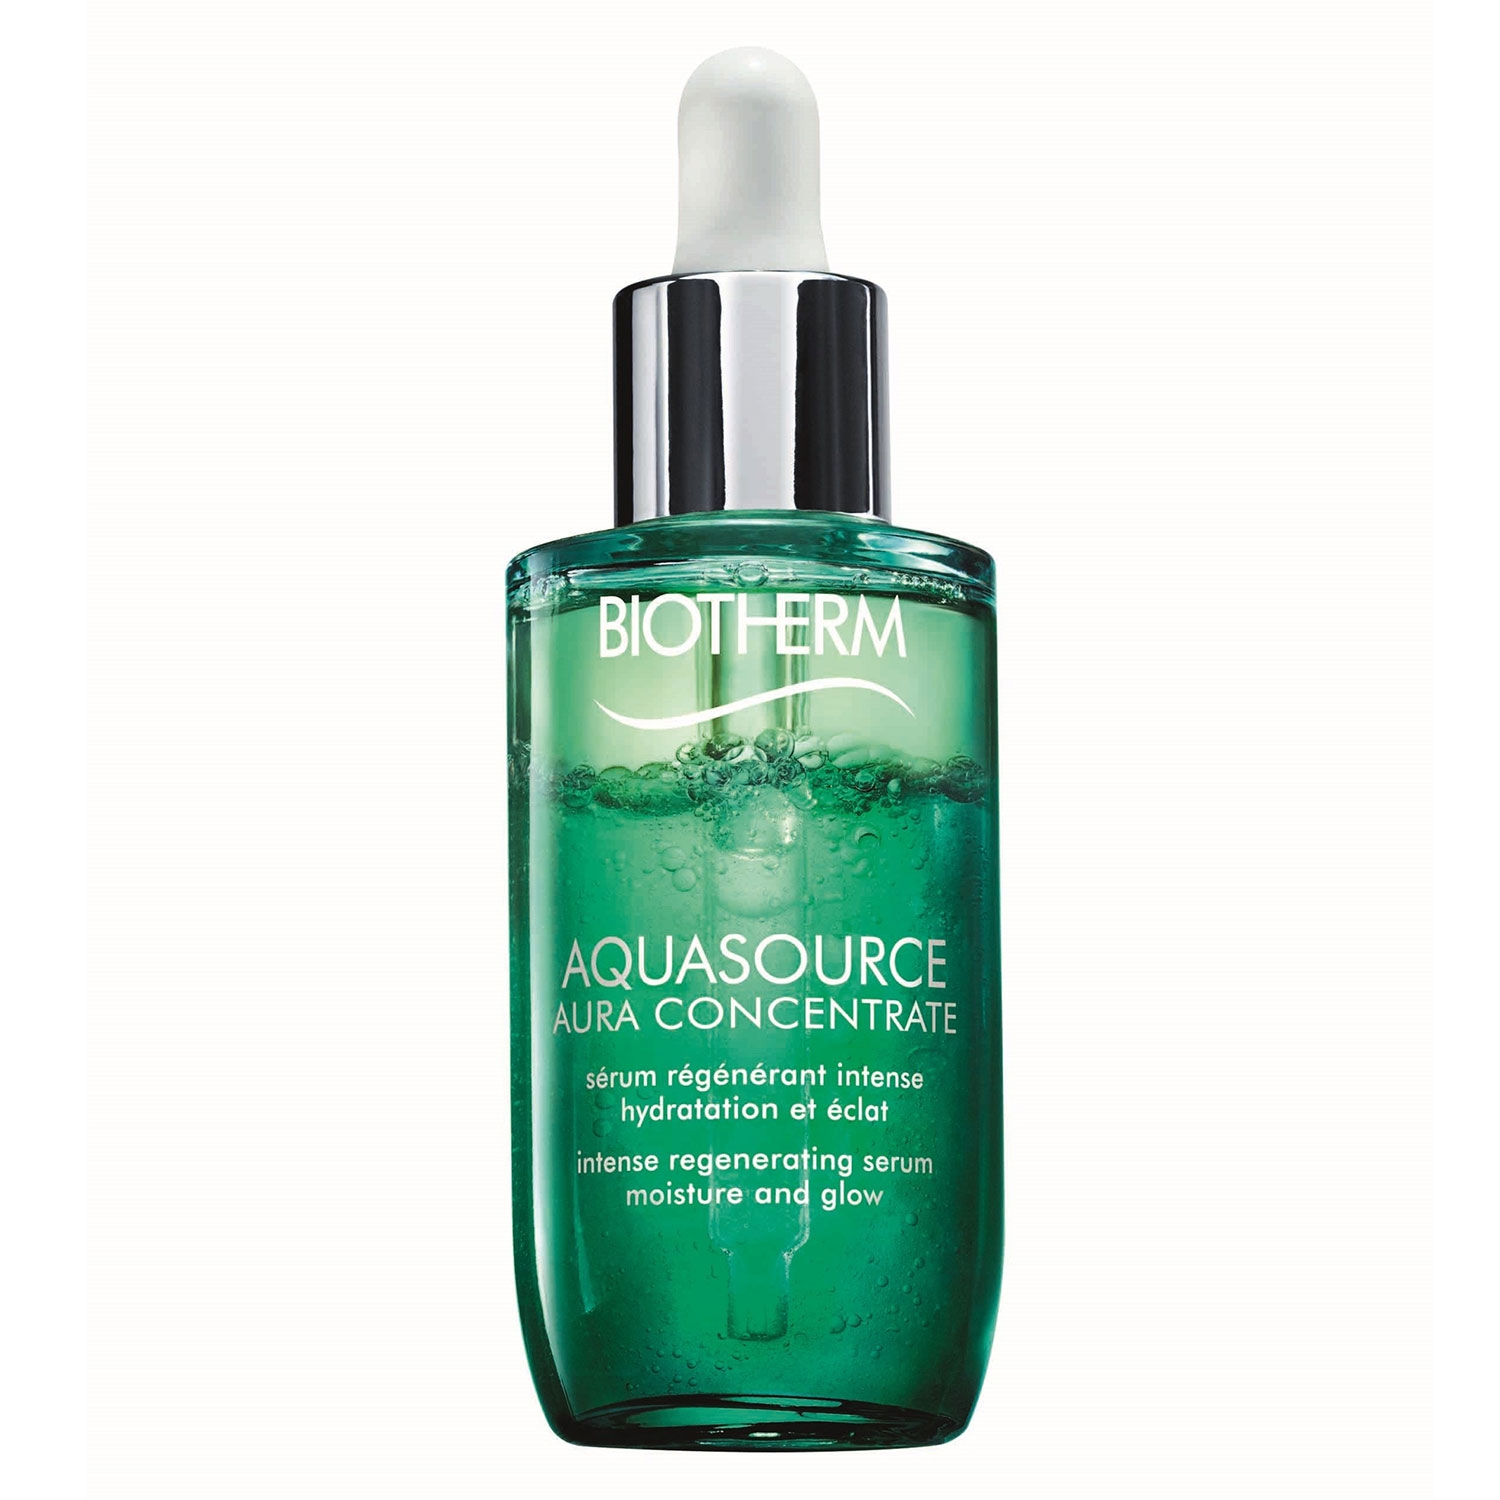 Product image from Aquasource - Aura Concentrate